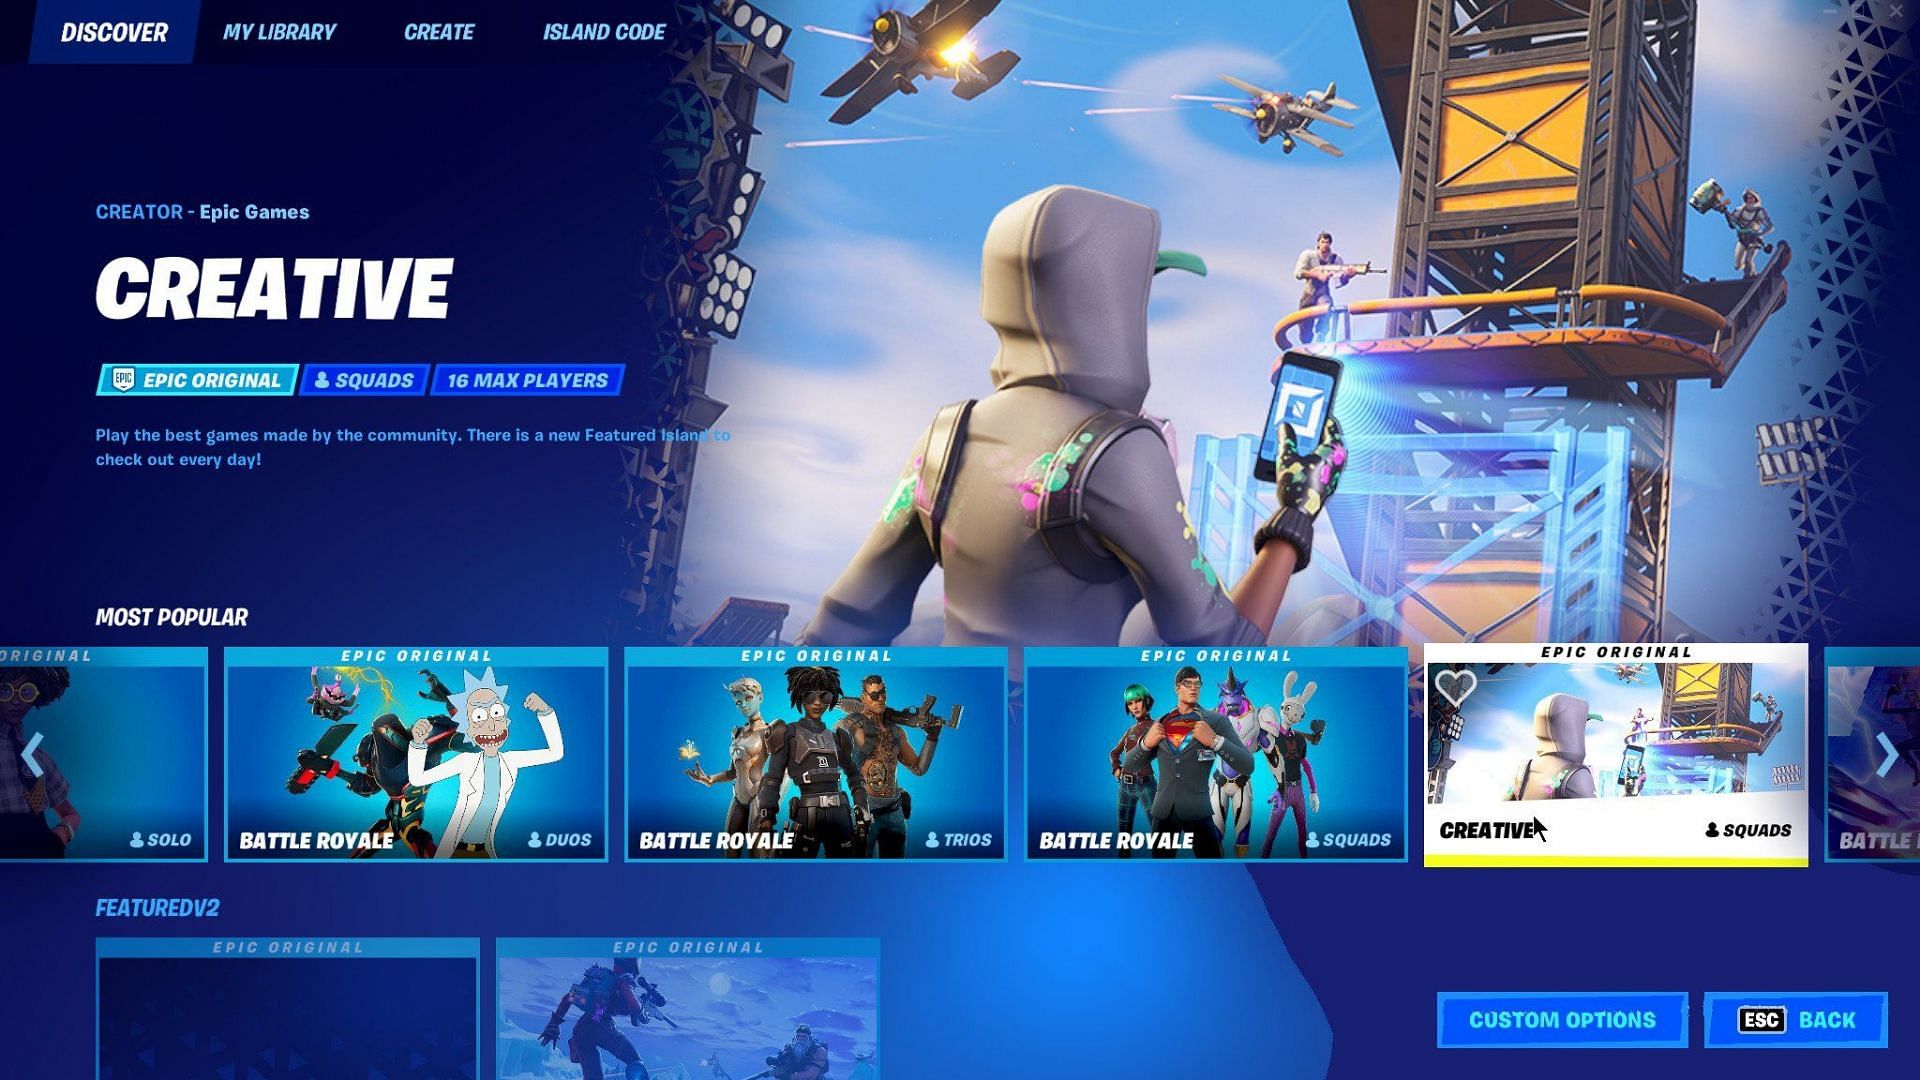 The Discover tab in Fortnite features many Creative games (Image via Epic Games)